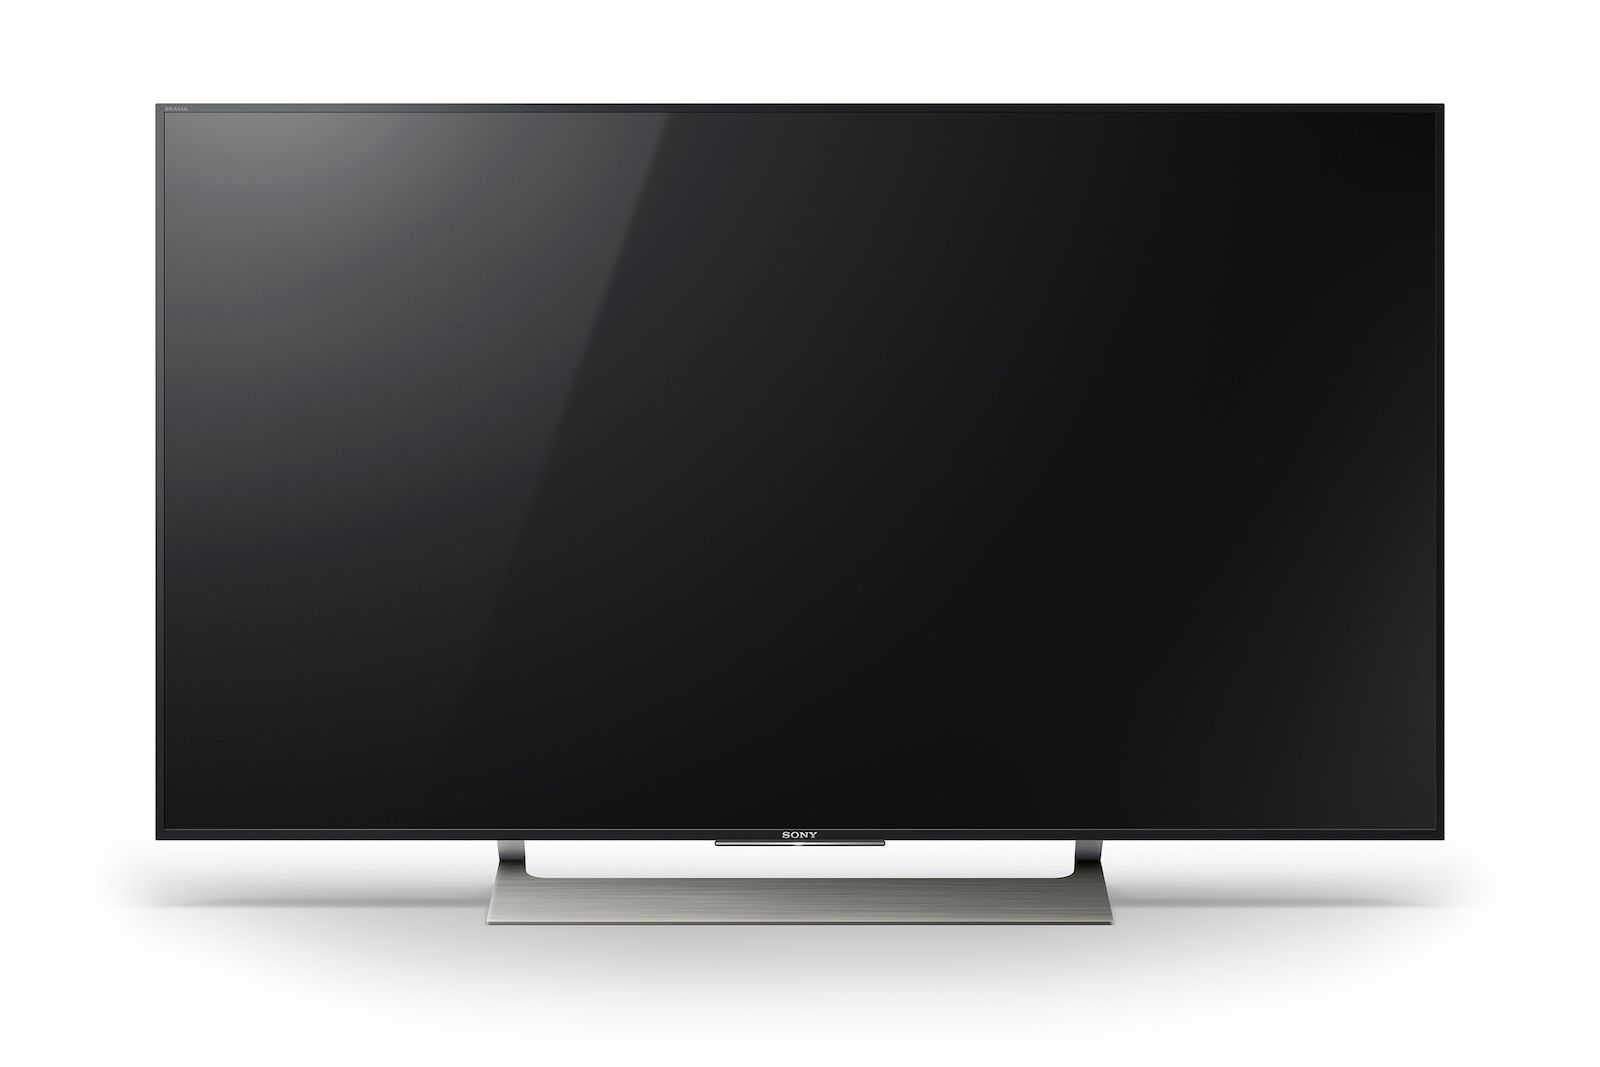 sony announces refreshed line up of 4k hdr tvs including dolby vision support image 2